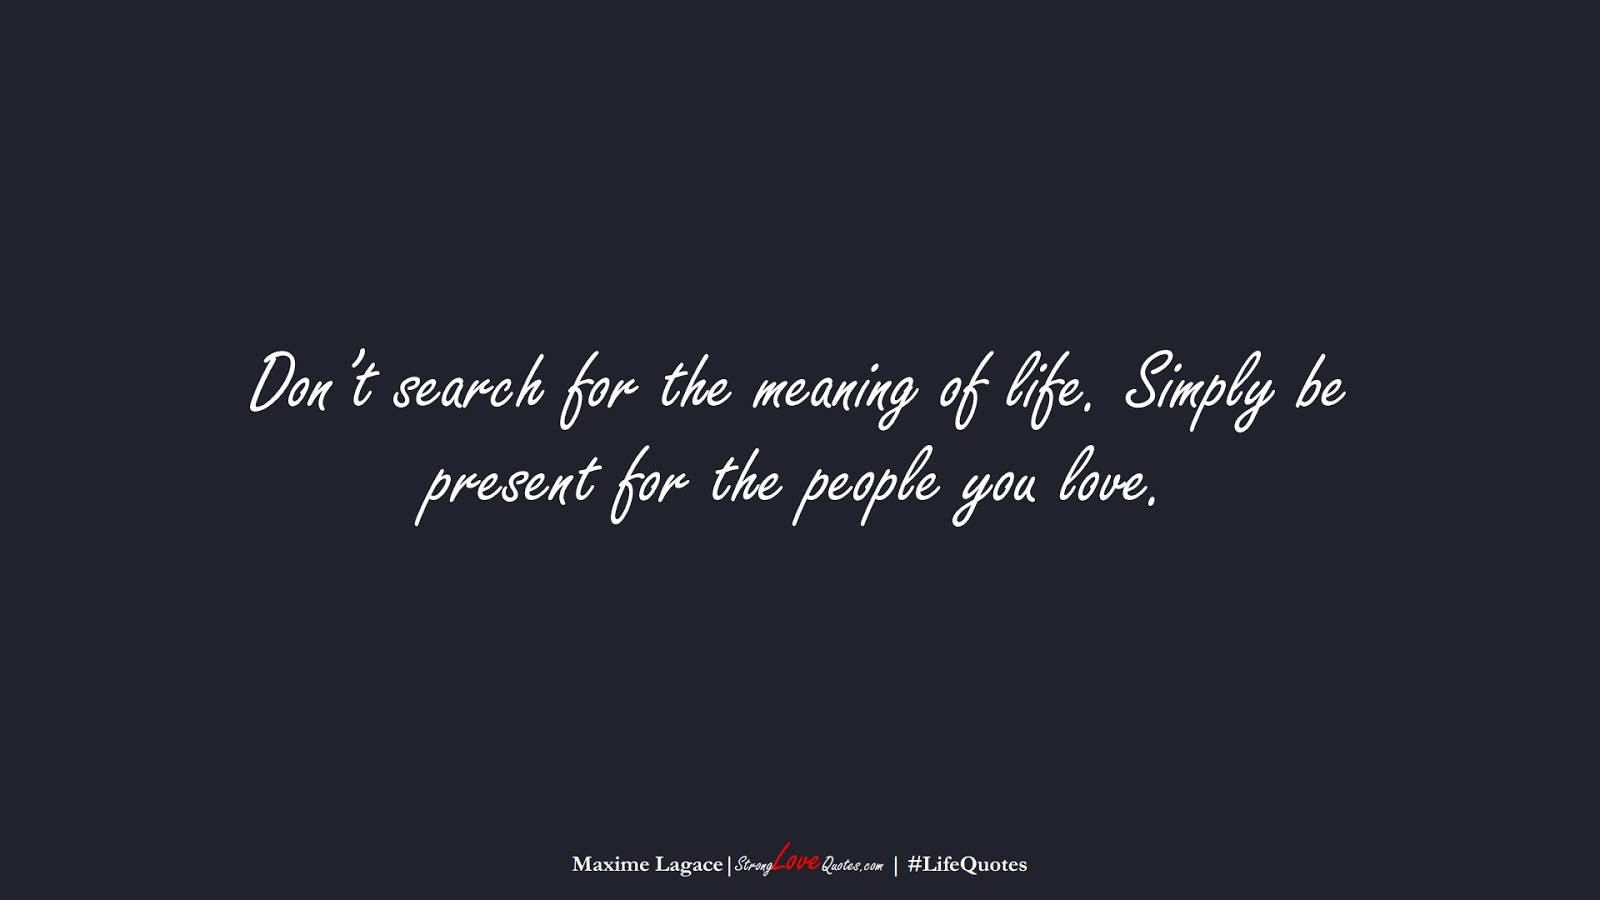 Don’t search for the meaning of life. Simply be present for the people you love. (Maxime Lagace);  #LifeQuotes